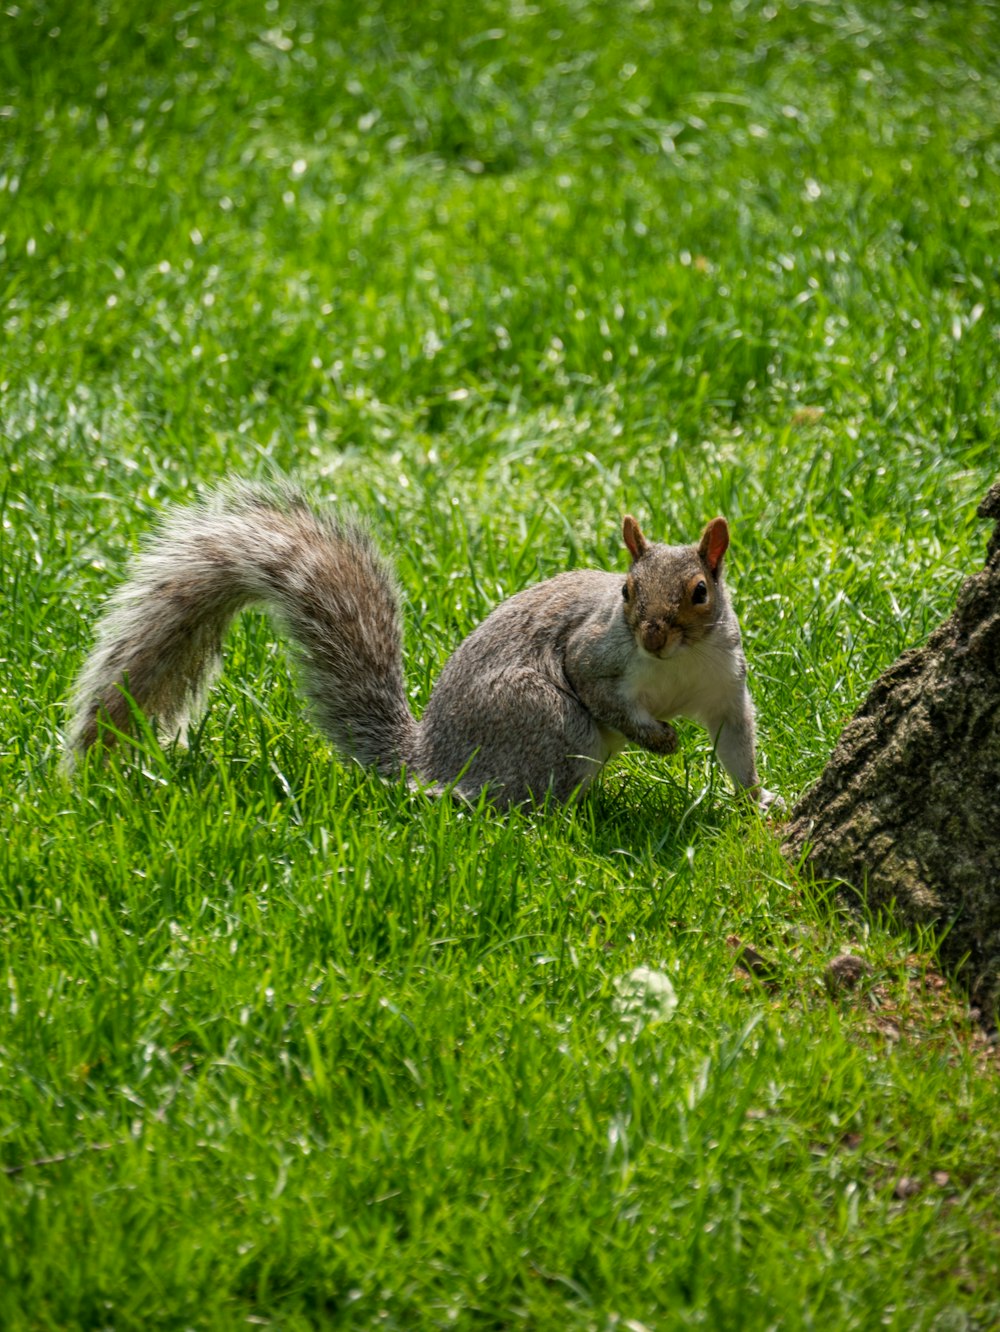 a squirrel is standing in the grass next to a tree